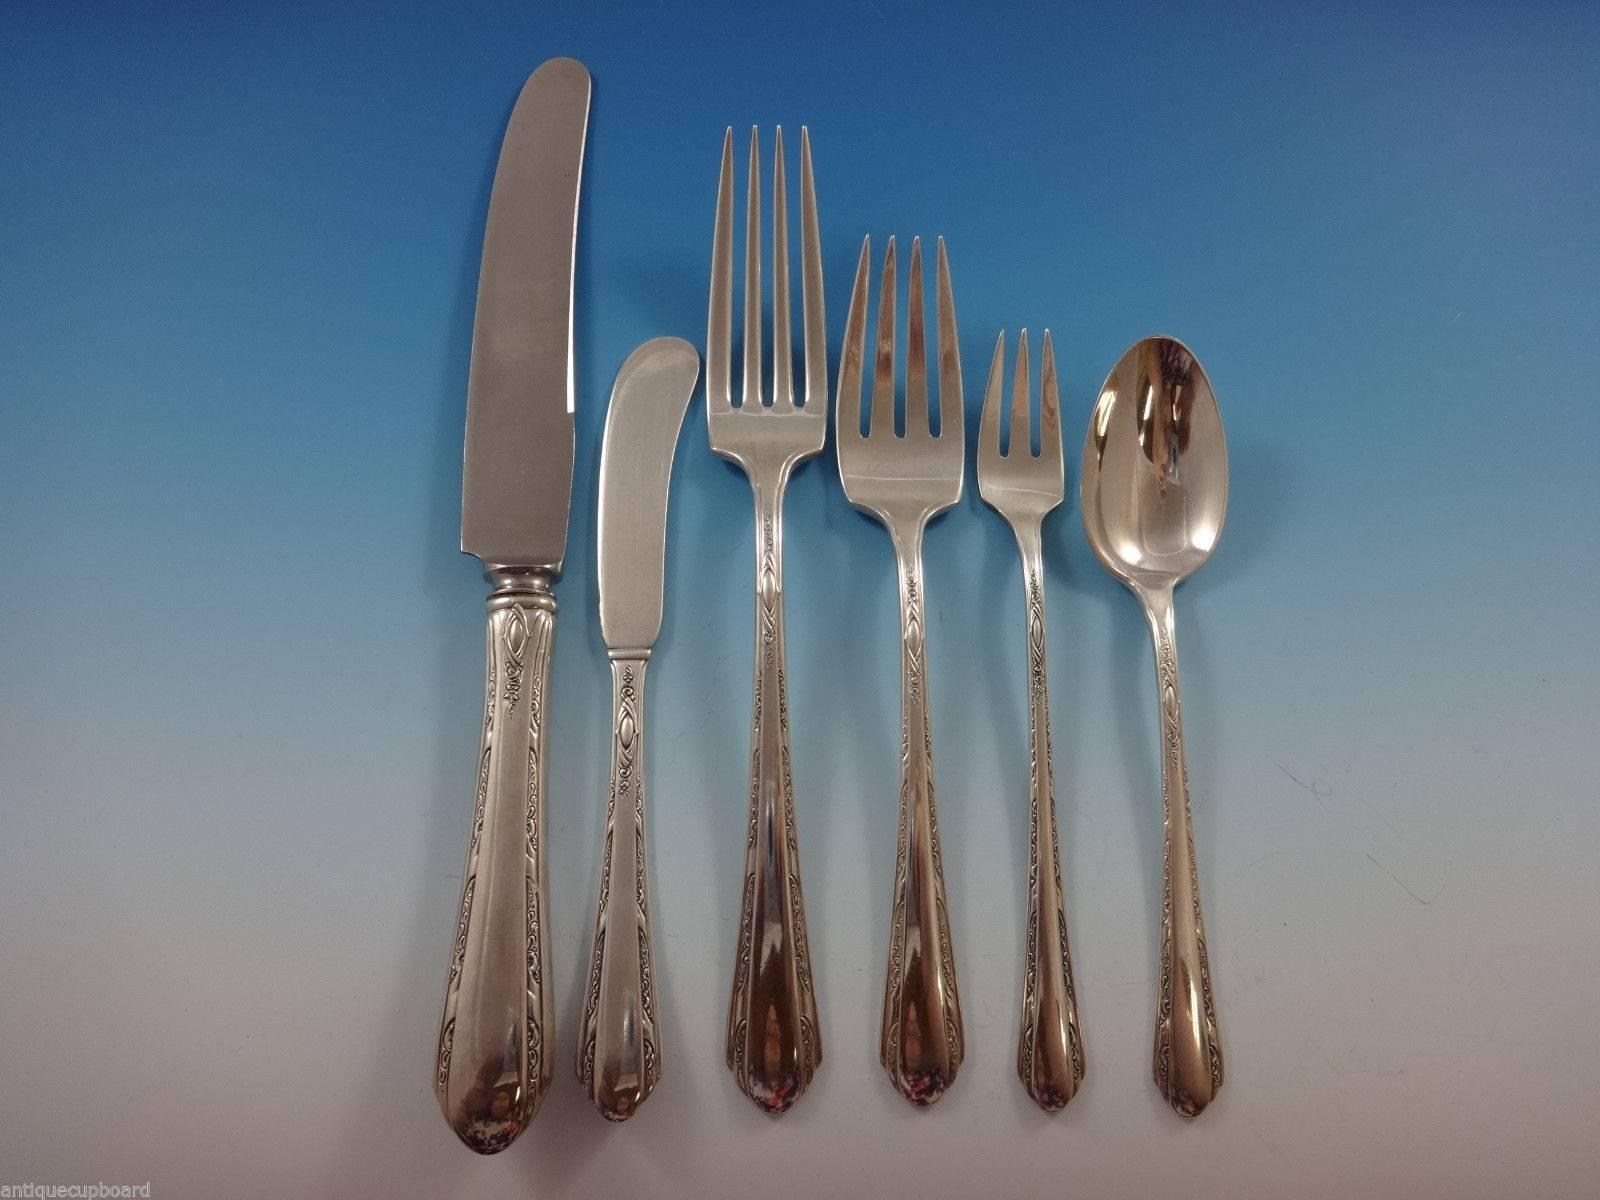 Lovely Chased Diana by Towle sterling silver flatware set, 81 pieces. This set includes:

12 knives, 8 7/8